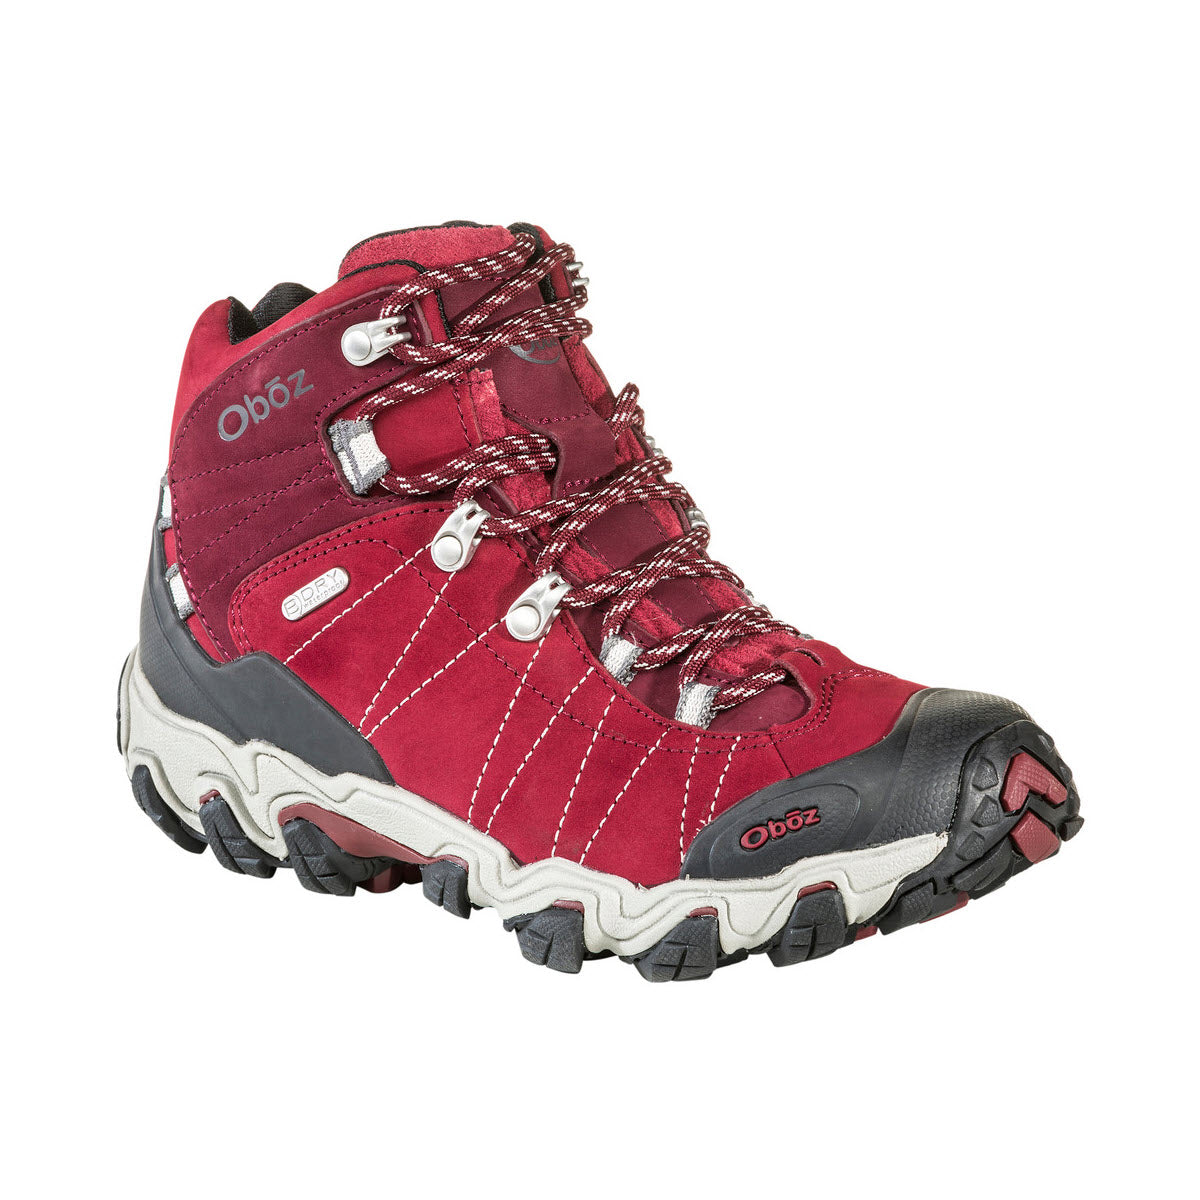 A red and gray Oboz Bridger Mid Bdry Rio Red hiking boot with metal eyelets and a rugged sole, featuring B-DRY waterproofing and a logo on the side.